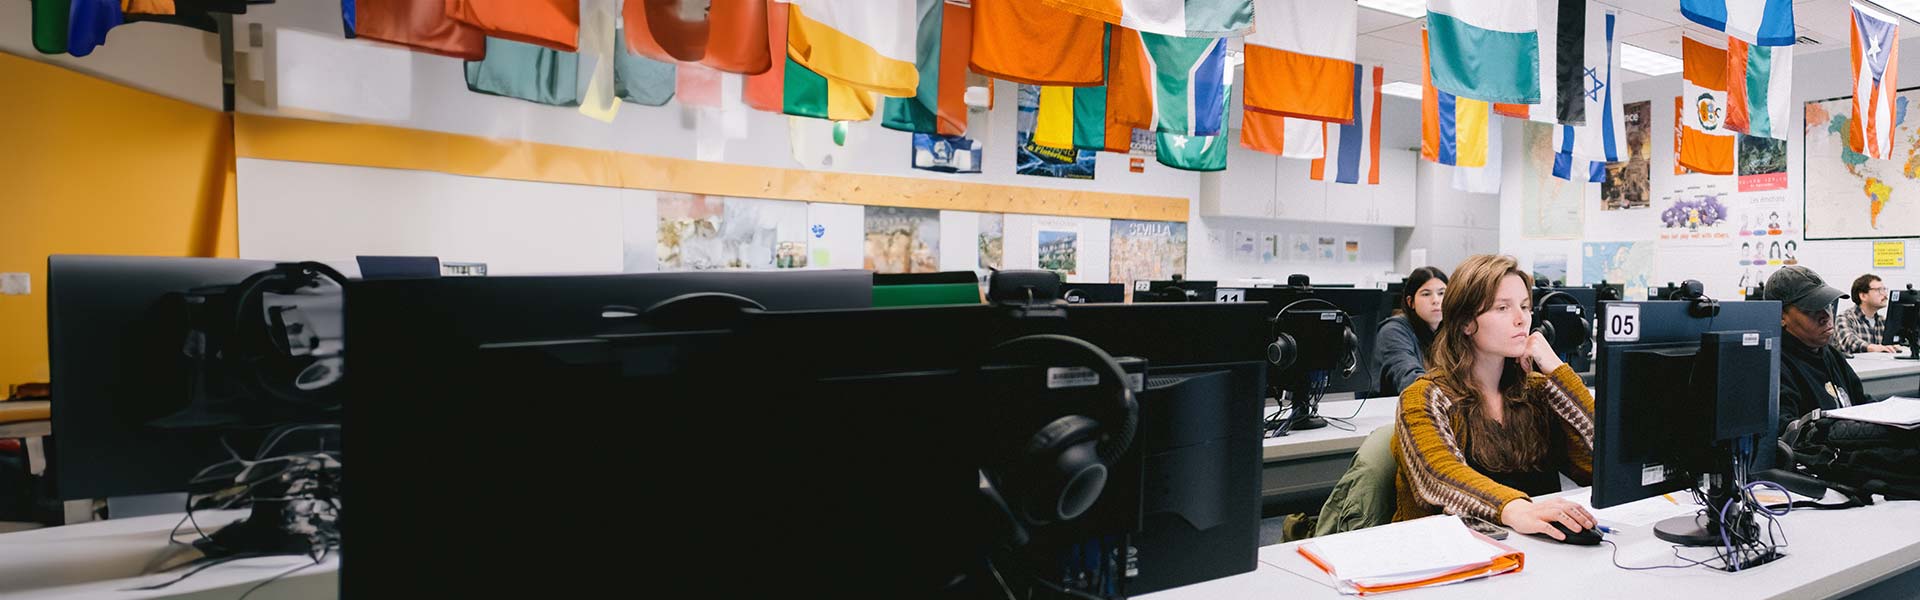 student in classroom with international flags hanging from ceiling